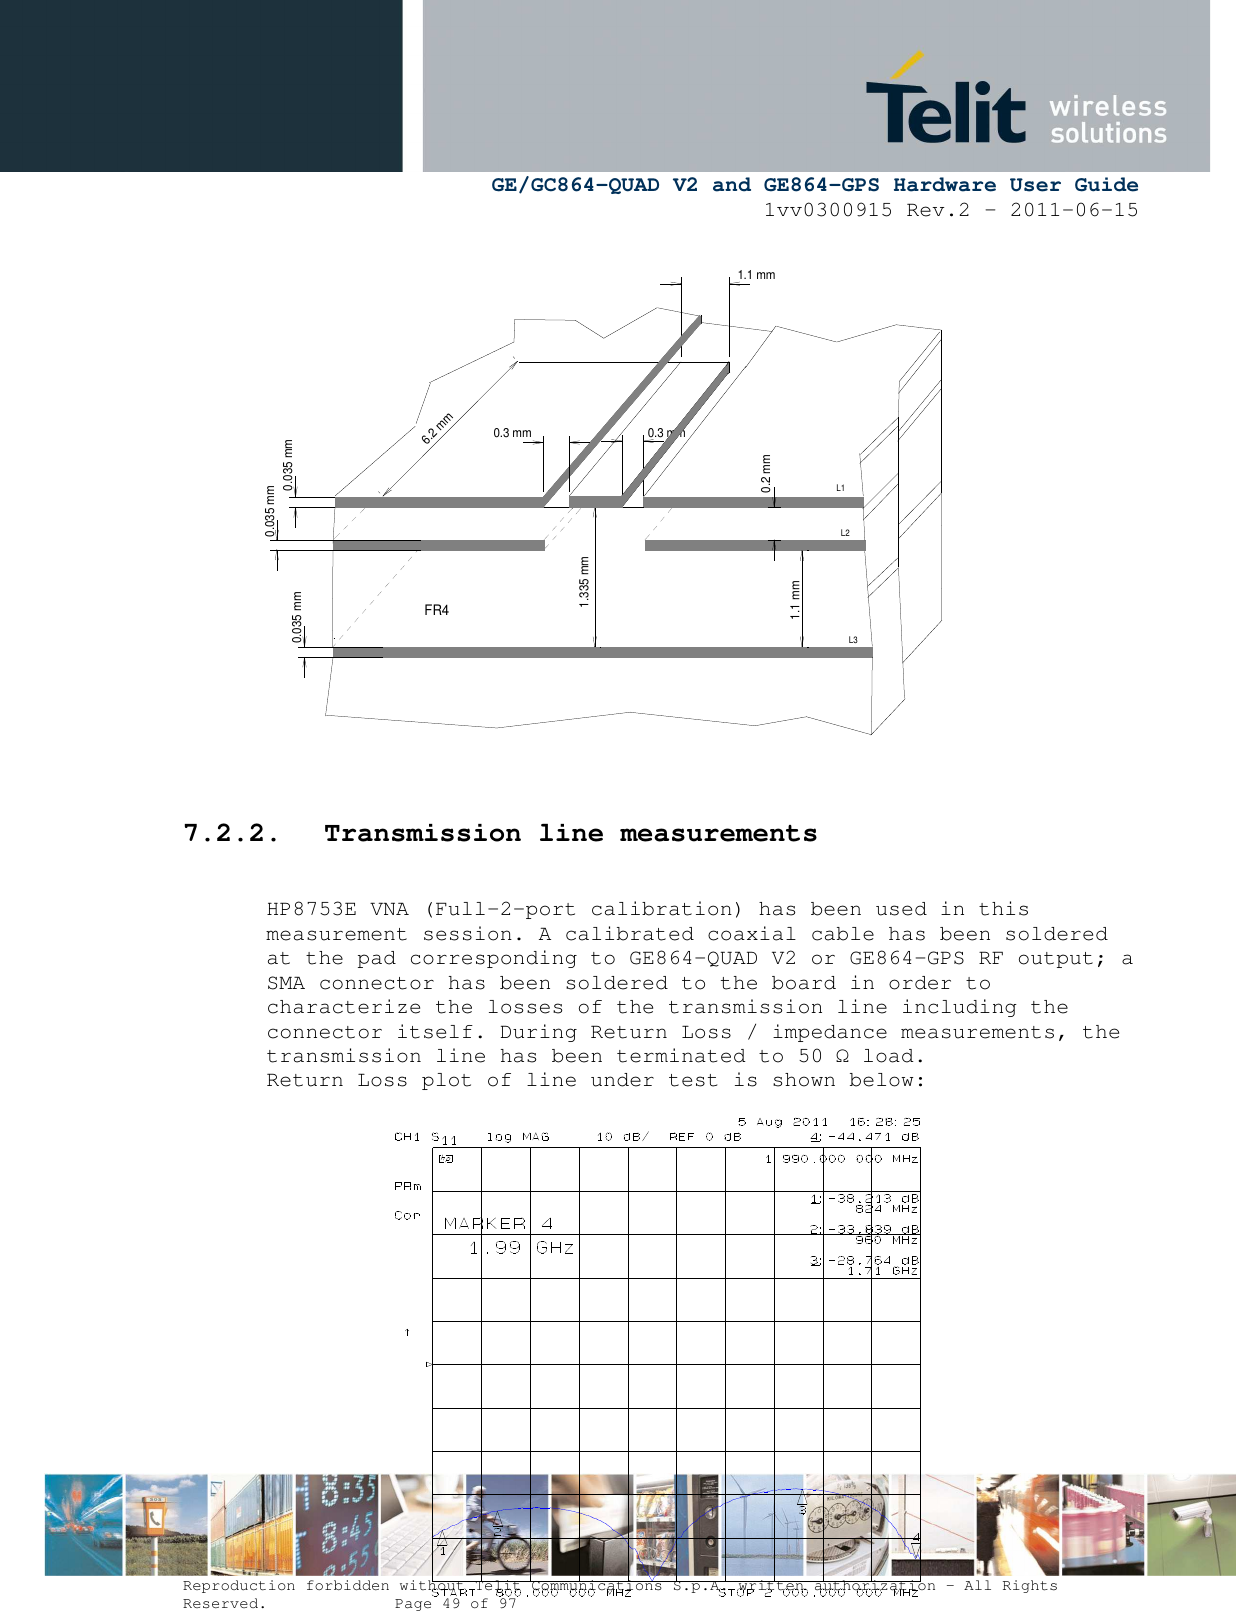      GE/GC864-QUAD V2 and GE864-GPS Hardware User Guide 1vv0300915 Rev.2 – 2011-06-15  Reproduction forbidden without Telit Communications S.p.A. written authorization - All Rights Reserved.    Page 49 of 97                      7.2.2. Transmission line measurements  HP8753E VNA (Full-2-port calibration) has been used in this measurement session. A calibrated coaxial cable has been soldered at the pad corresponding to GE864-QUAD V2 or GE864-GPS RF output; a SMA connector has been soldered to the board in order to characterize the losses of the transmission line including the connector itself. During Return Loss / impedance measurements, the transmission line has been terminated to 50 Ω load. Return Loss plot of line under test is shown below:               0.3 mm0.035 mm0.3 mm6.2 mmFR40.035 mm0.035 mm1.335 mm0.2 mm1.1 mmL3L2L11.1 mm